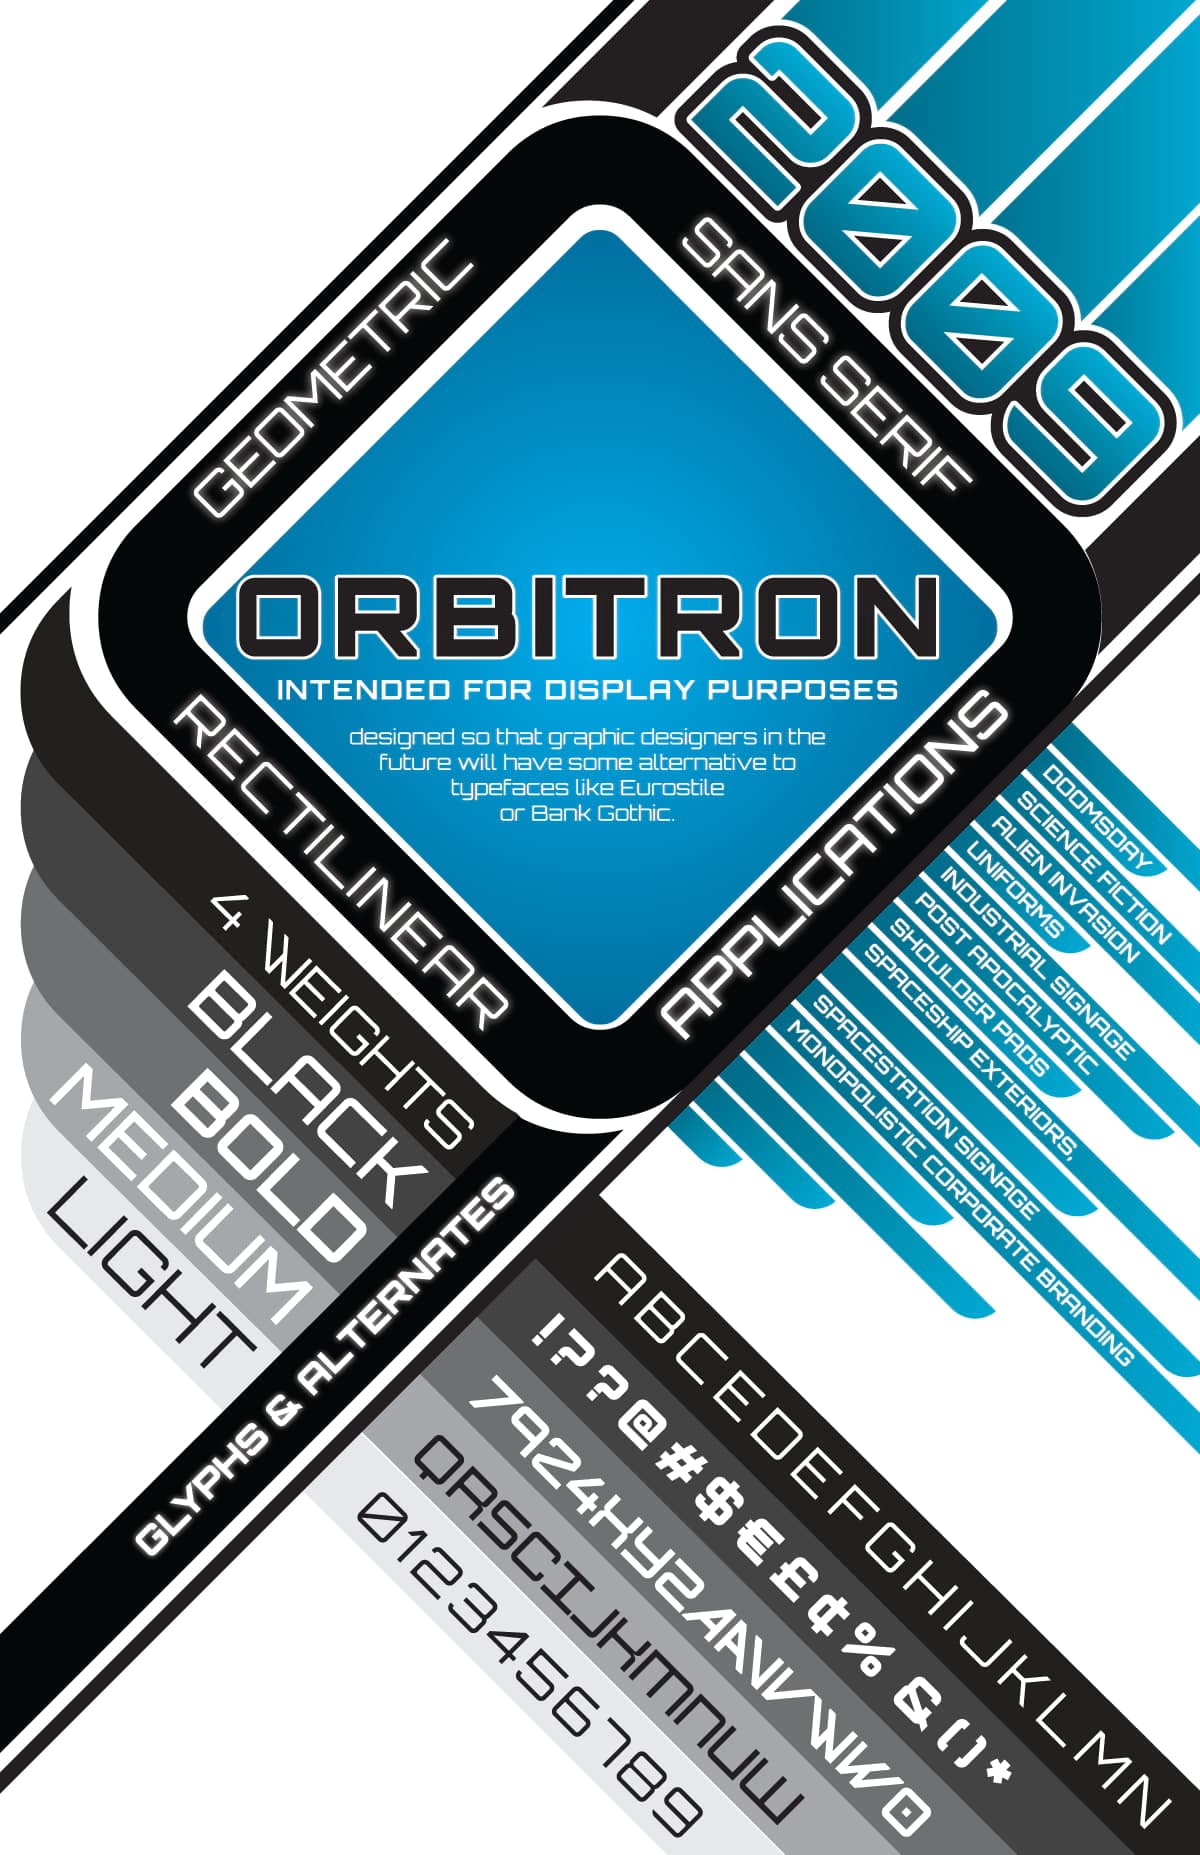 Orbitron poster by Andre Clark.